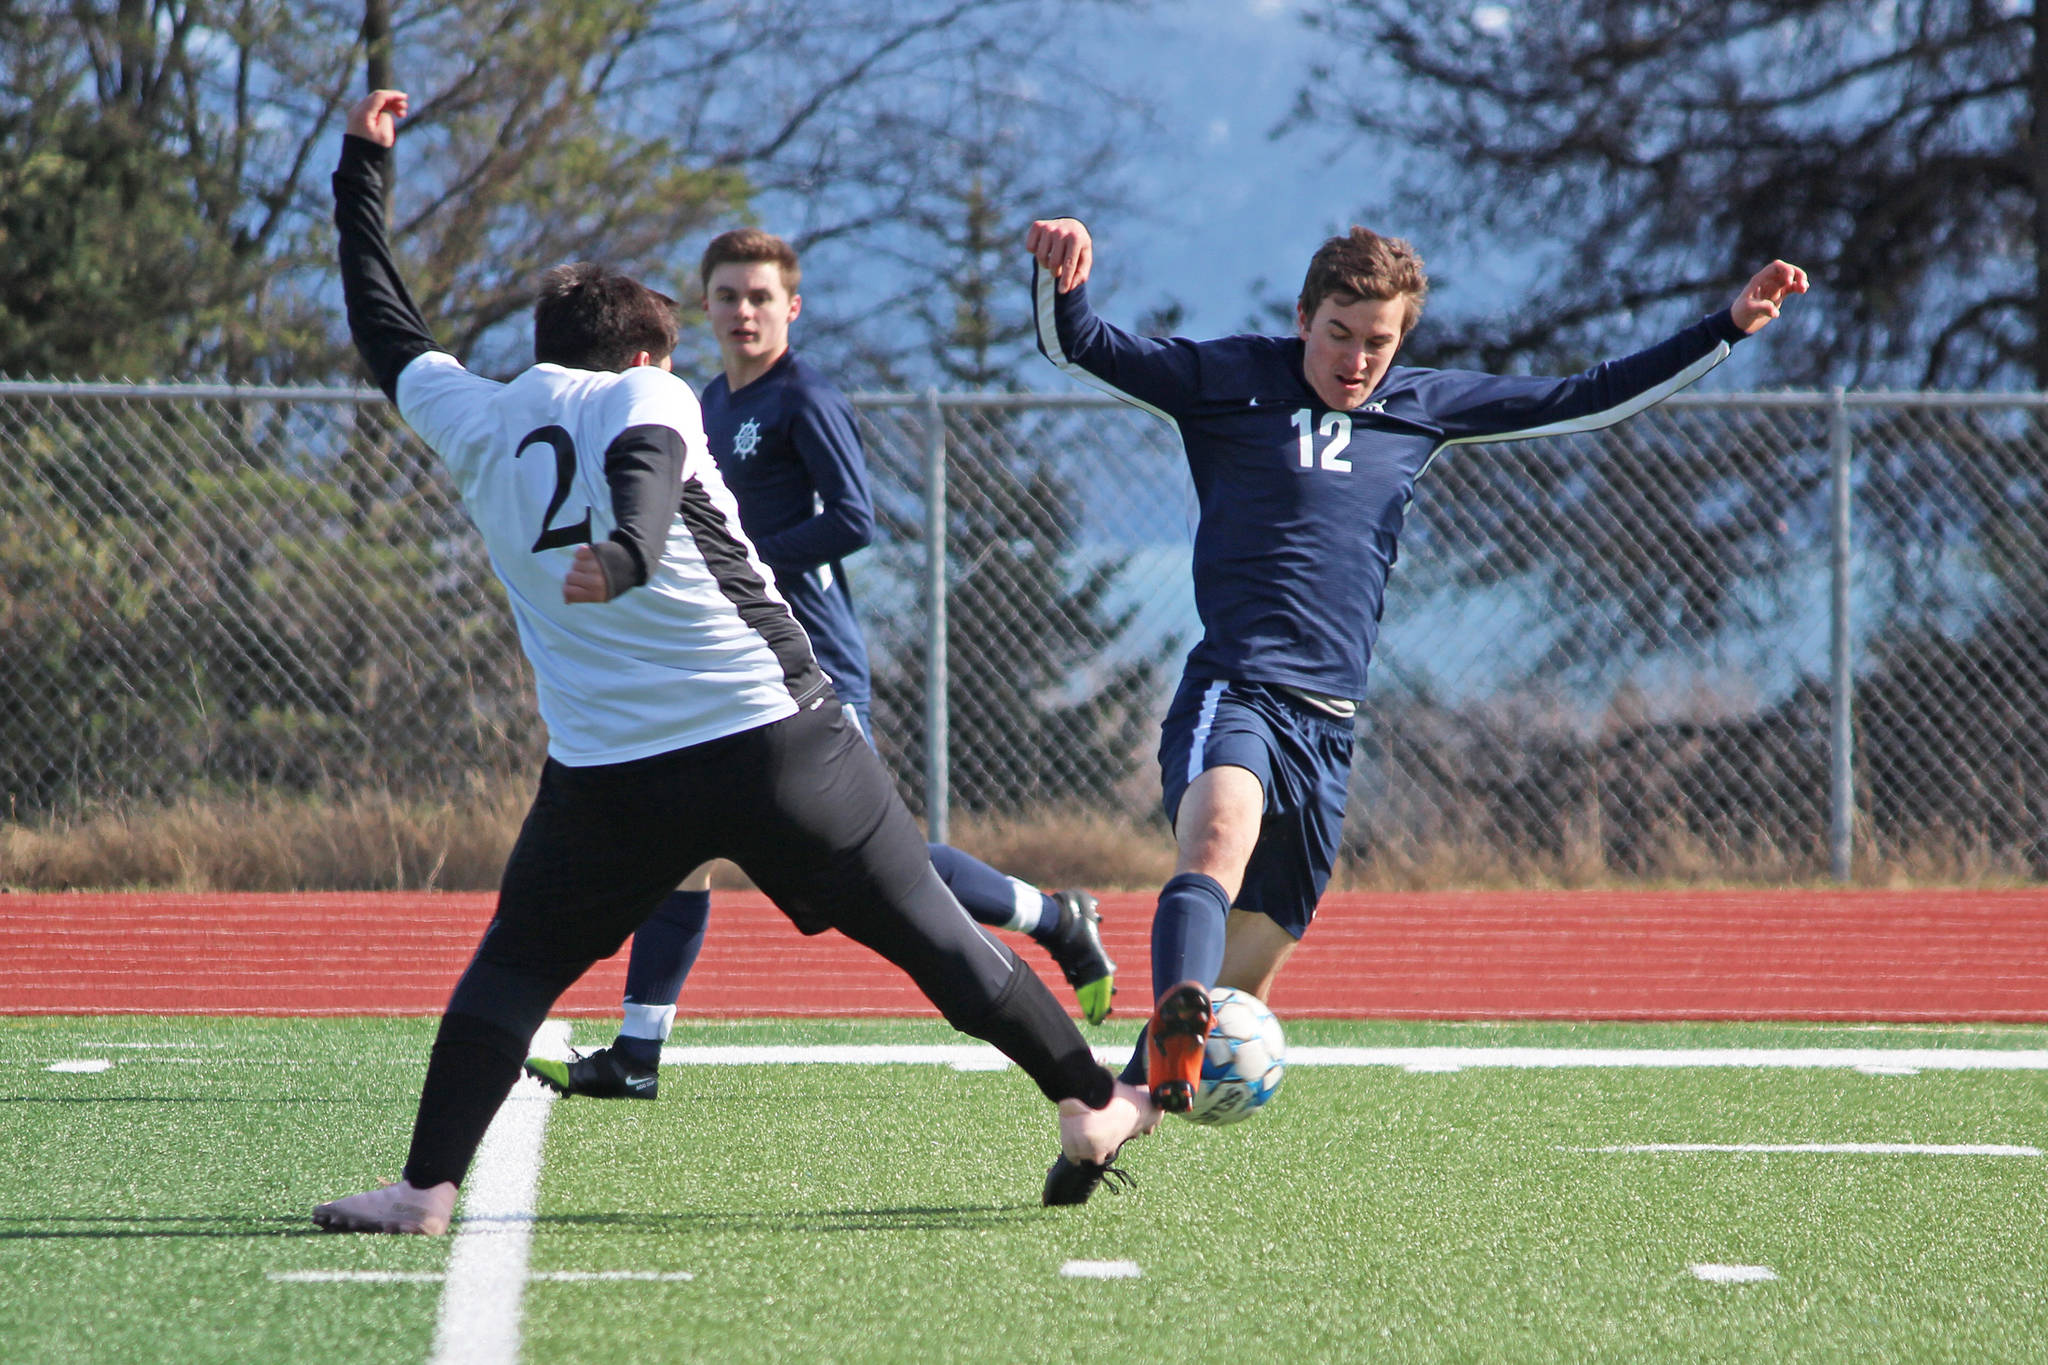 Nikiski’s Trevor Mysing and Homer’s Daniel Reutov connect over the ball during a soccer game Tuesday, April 23, 2019 at Homer High School in Homer, Alaska. (Photo by Megan Pacer/Homer News)